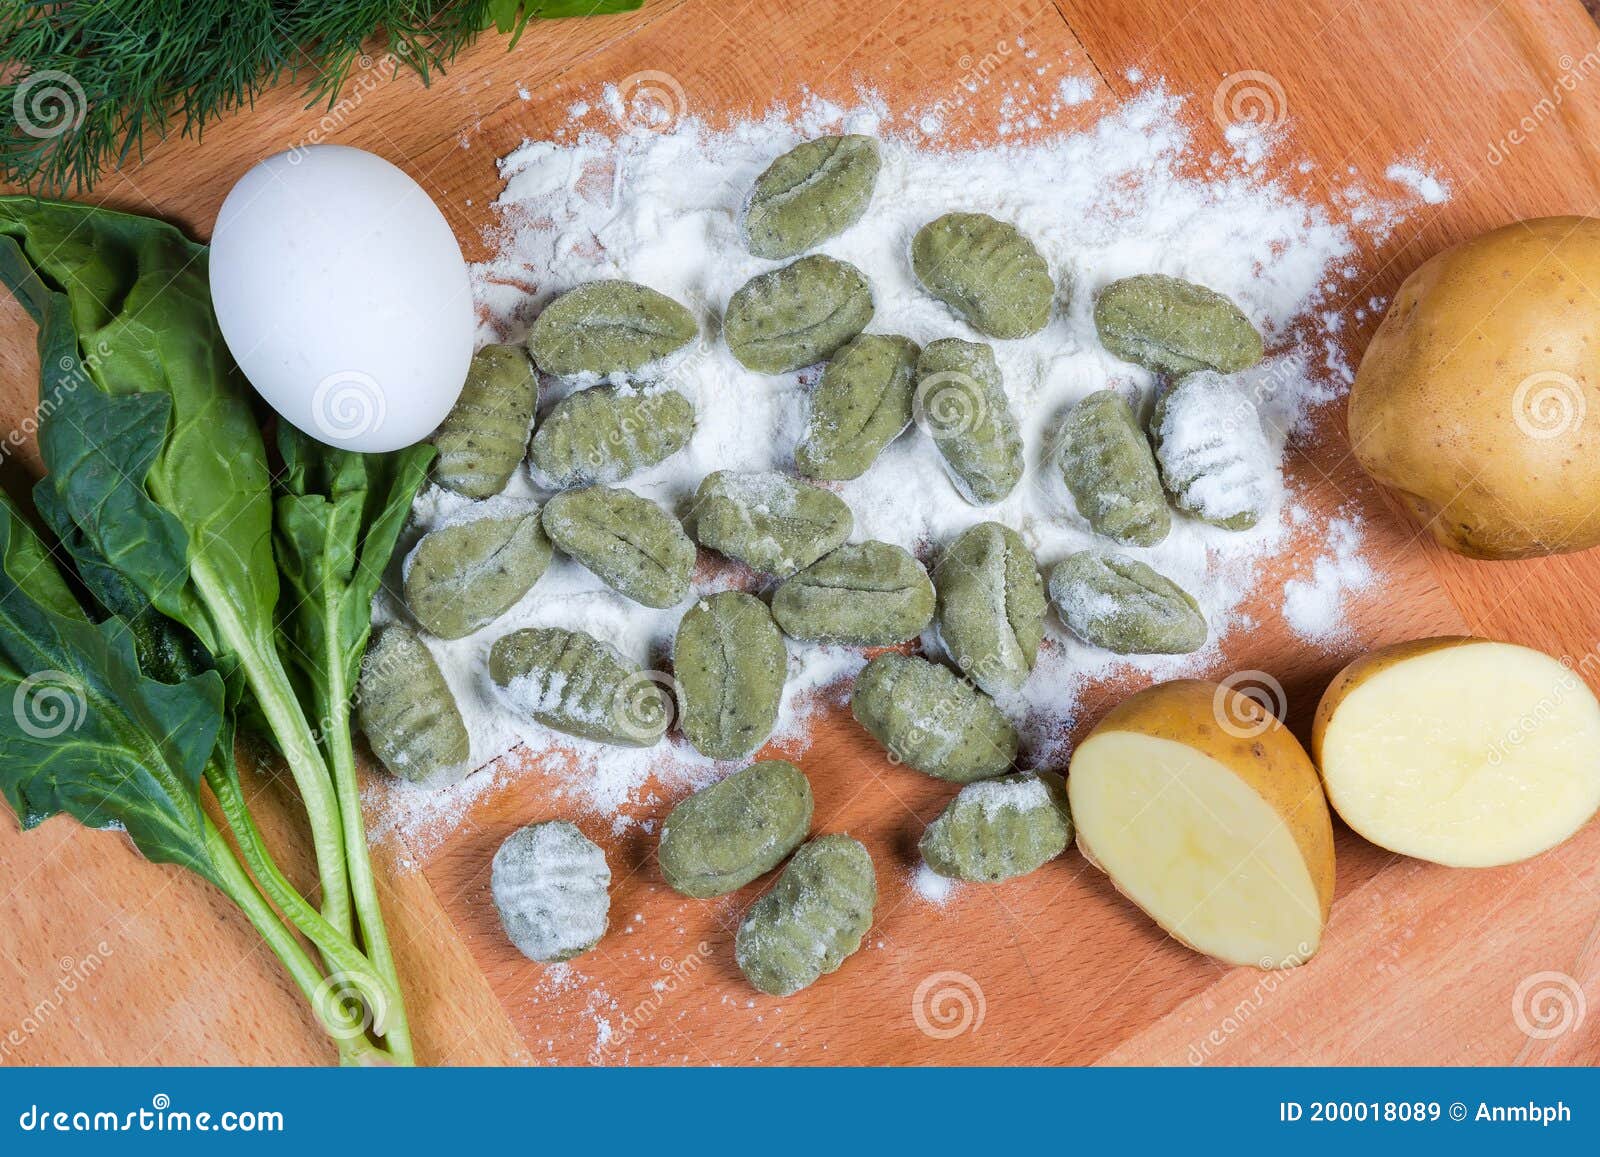 raw potato gnocchi with spinach in flour, ingredients, top view